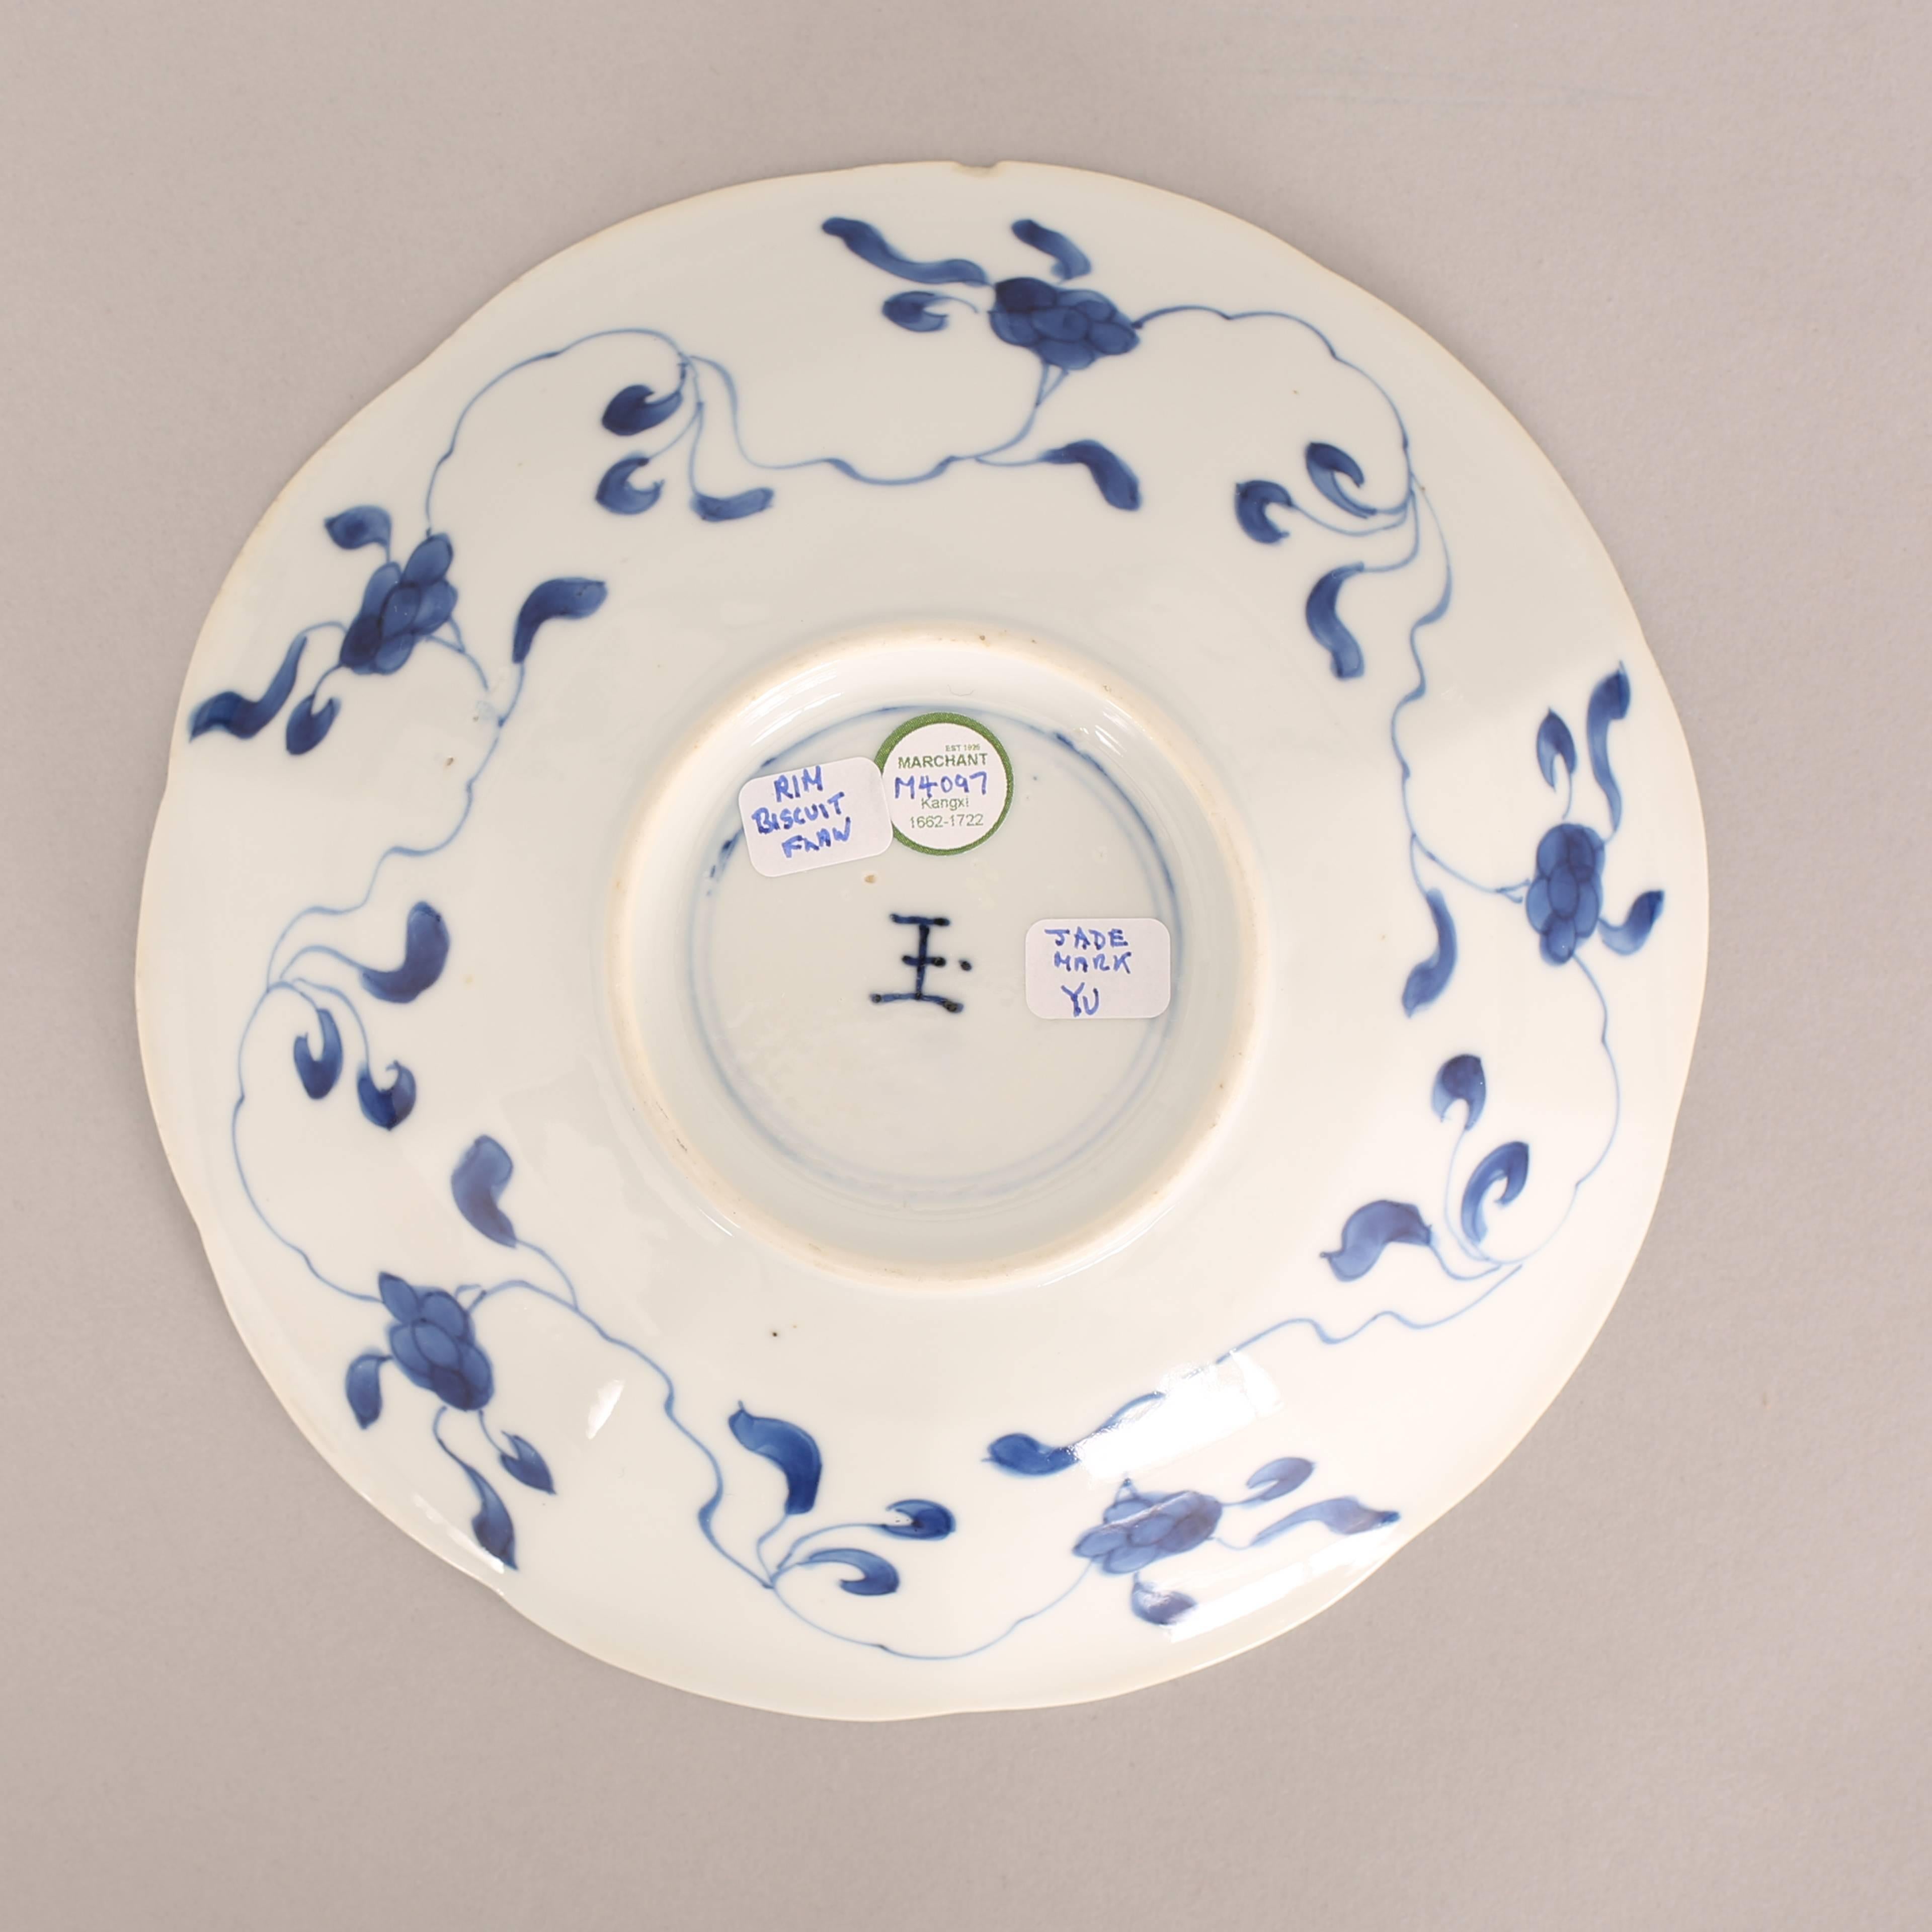 A Chinese porcelain blue and white saucer dish of lobed form, painted with ten paneled scenes of women and flowers, encircling a central medallion with a seated lady beside a plant on a small table, the underside painted with a continuous floral